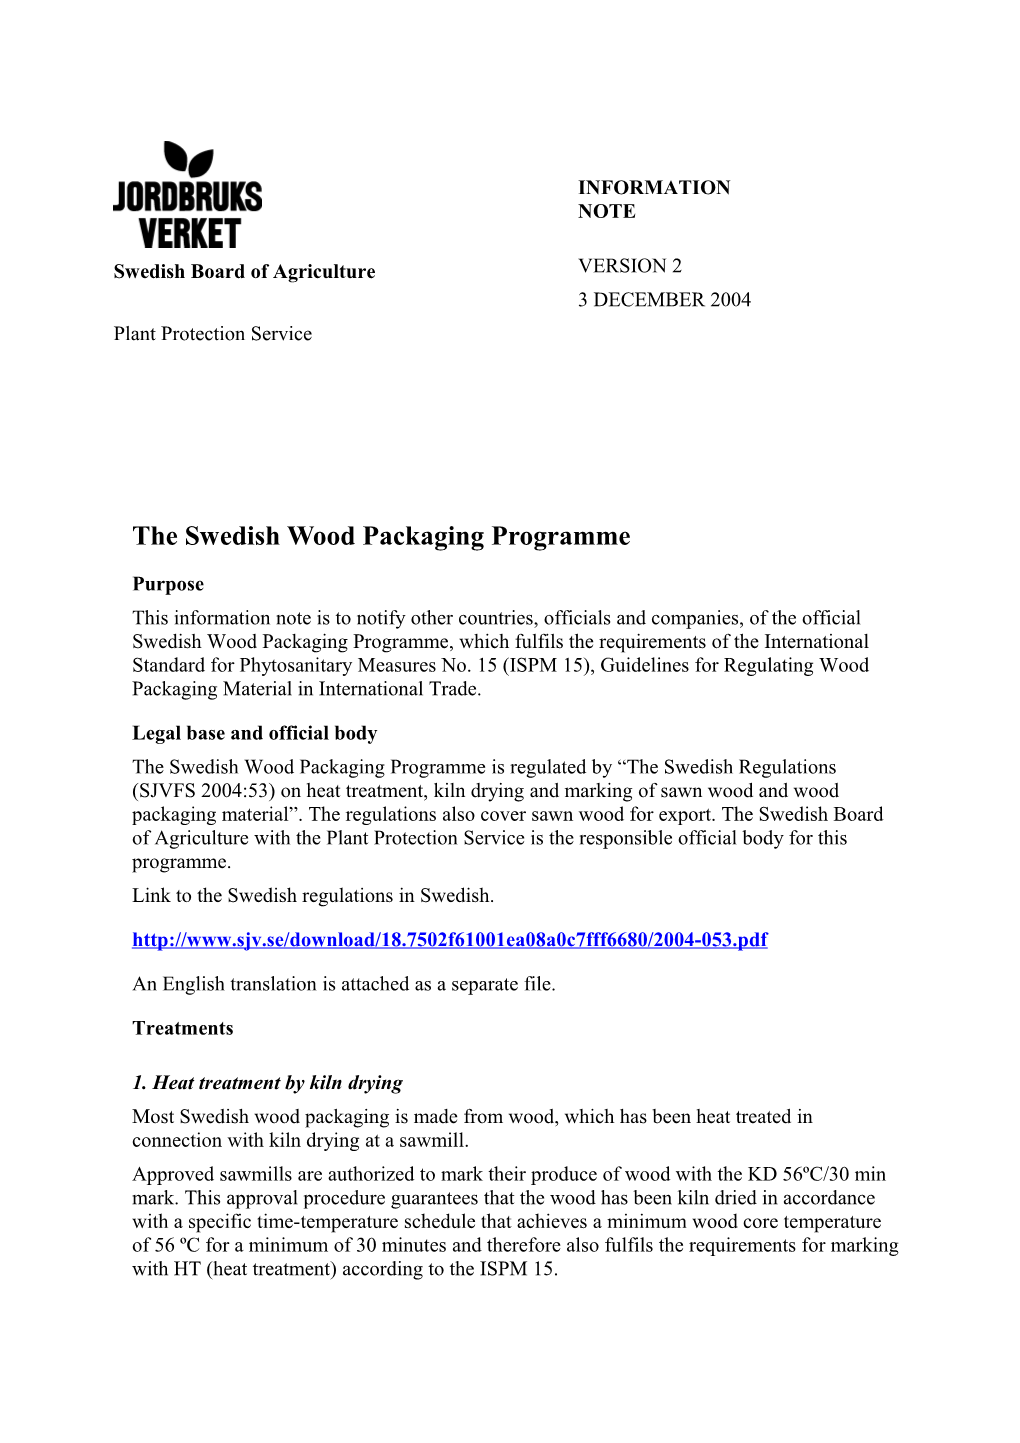 The Swedish Wood Packaging Programme